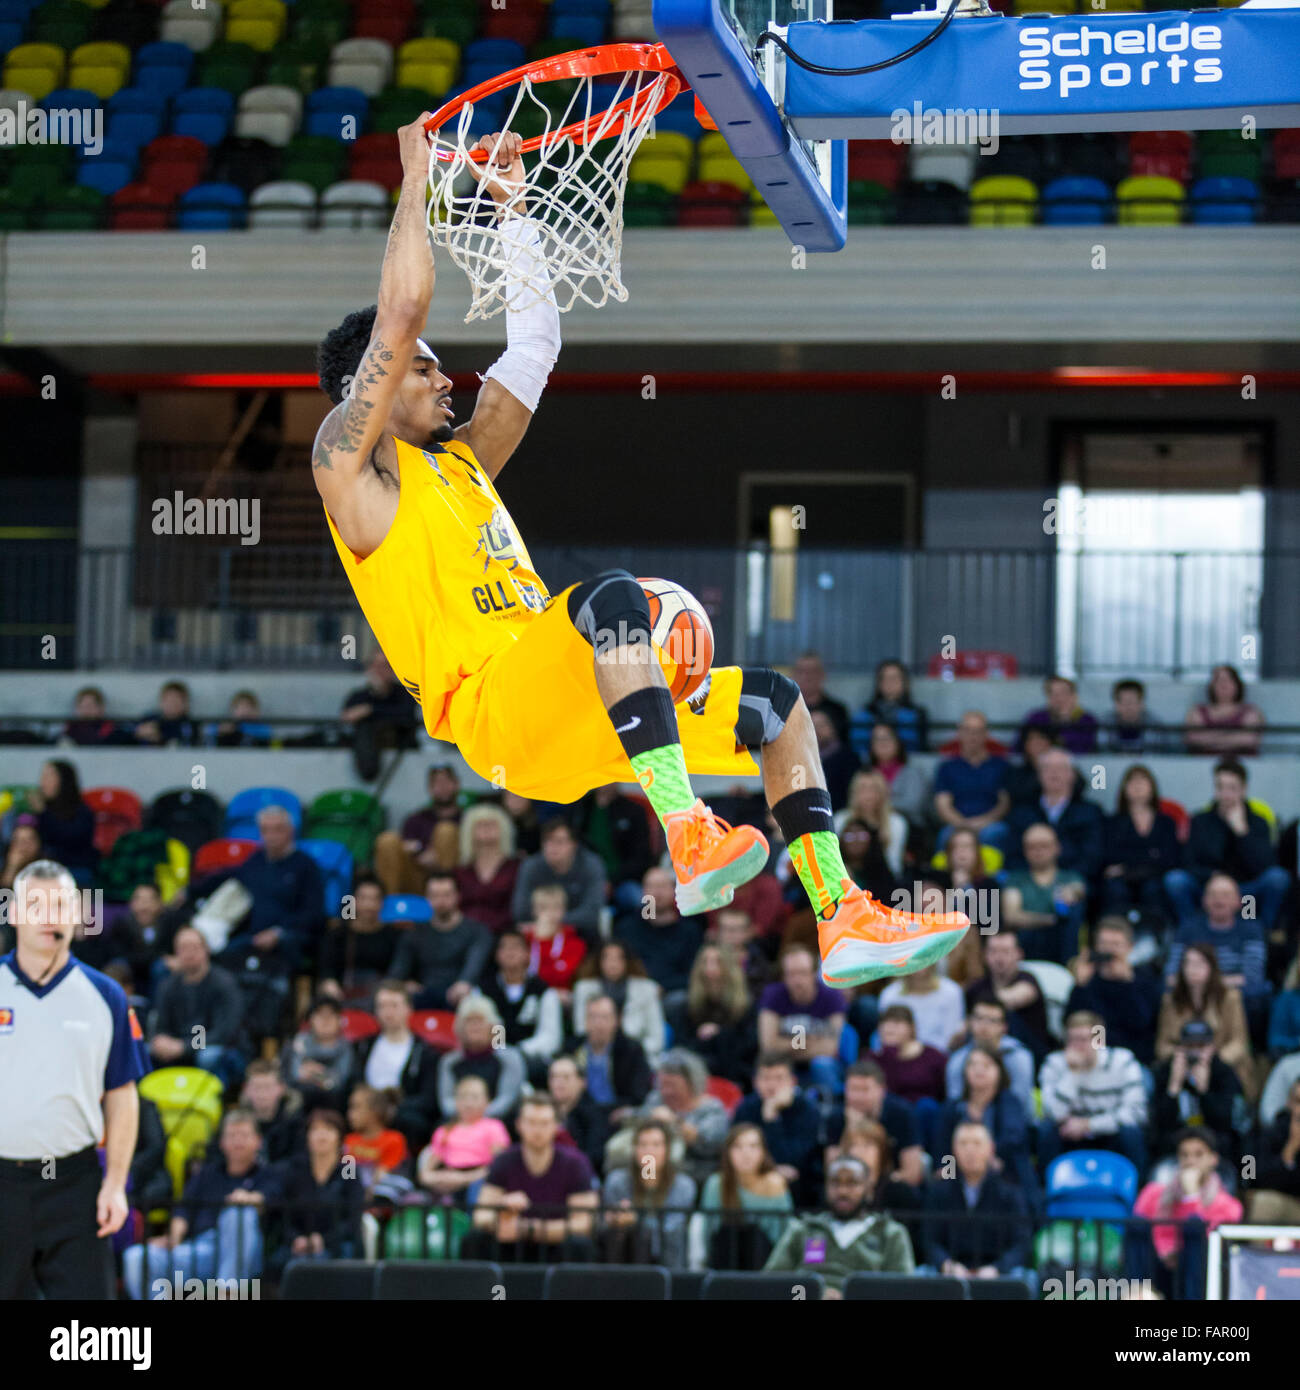 London, UK. 3rd January 2016. London Lions' Nick Lewis (11) outruns the Plymouth defense and dunks the ball during the London Lions vs. Plymouth Raiders BBL game at the Copper Box Arena in the Olympic Park. London Lions win 86-84 Credit:  Imageplotter/Alamy Live News Stock Photo